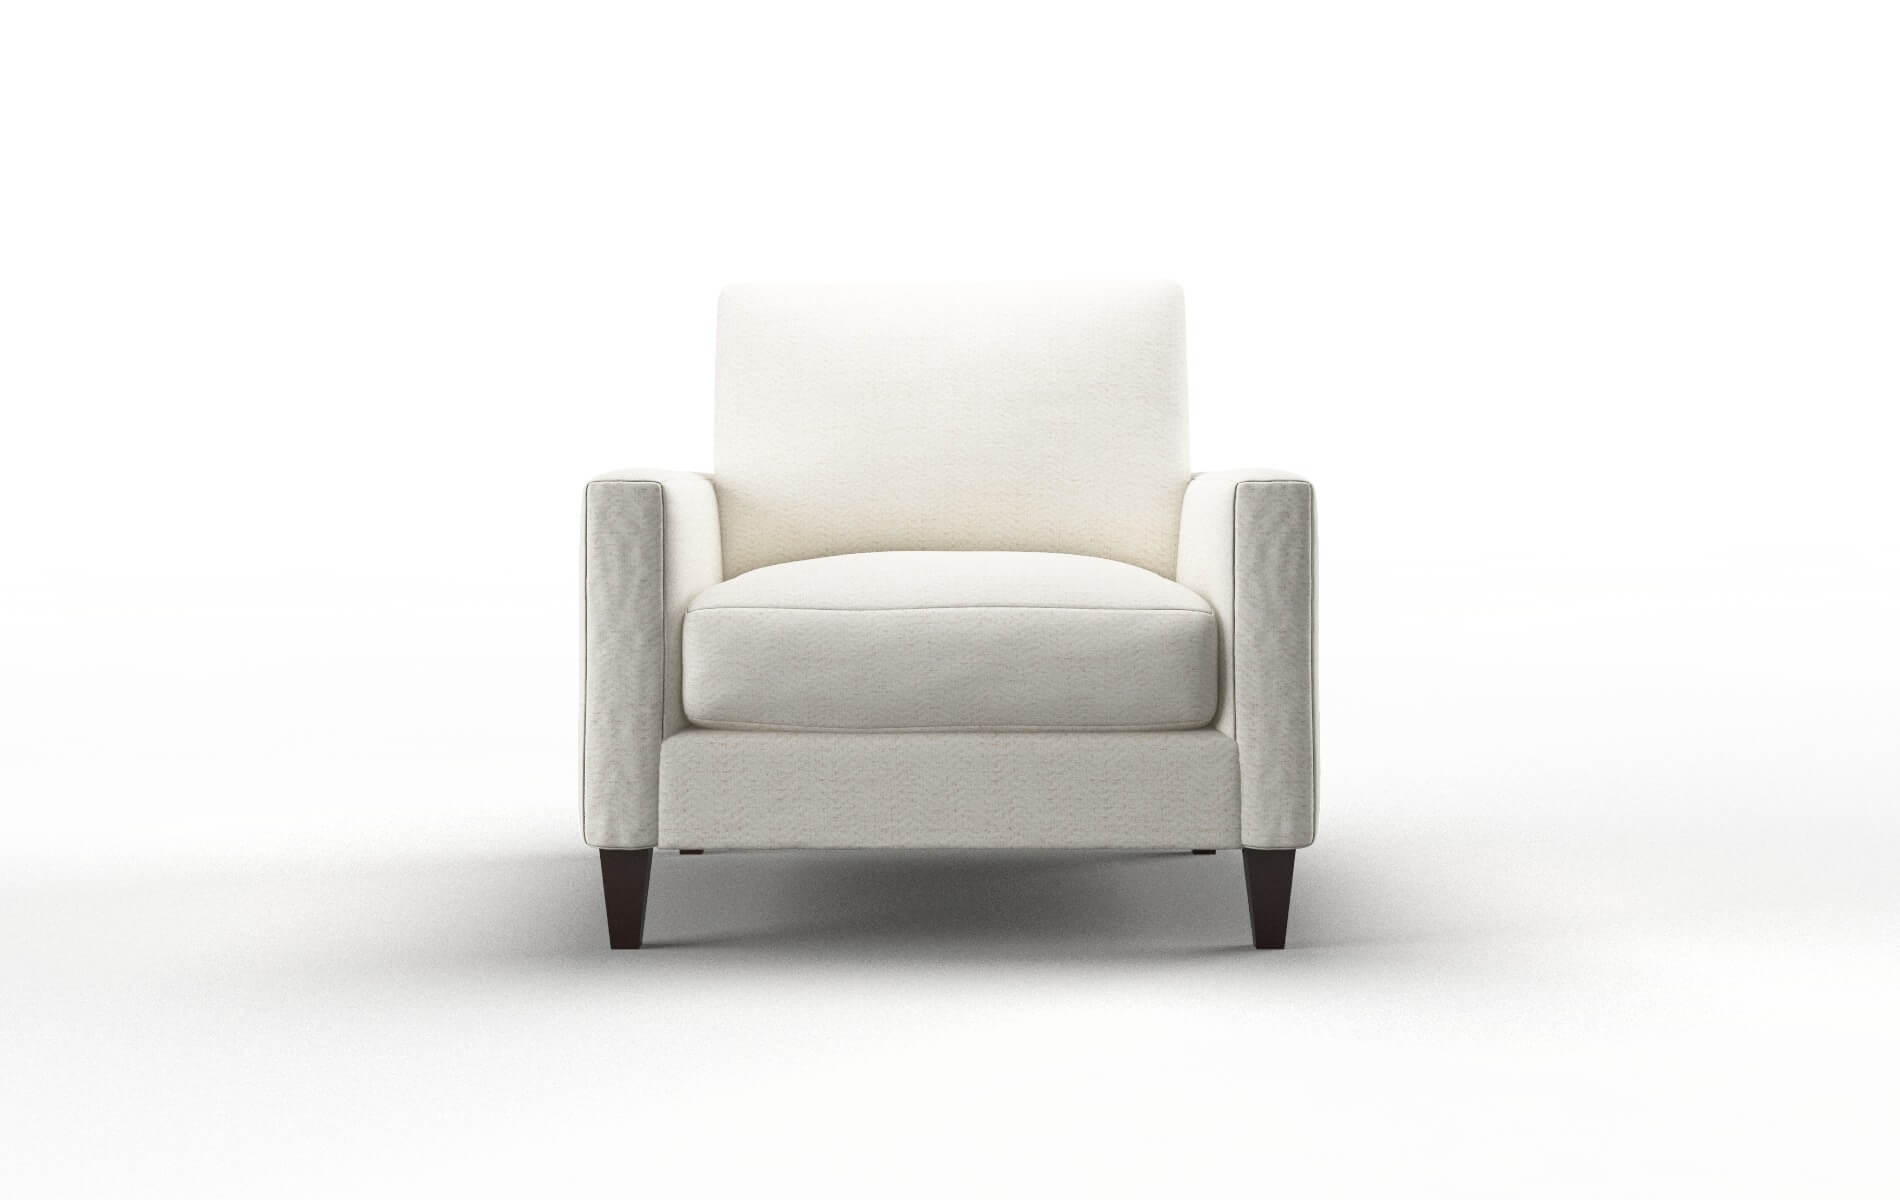 Cannes Catalina Ivory chair espresso legs